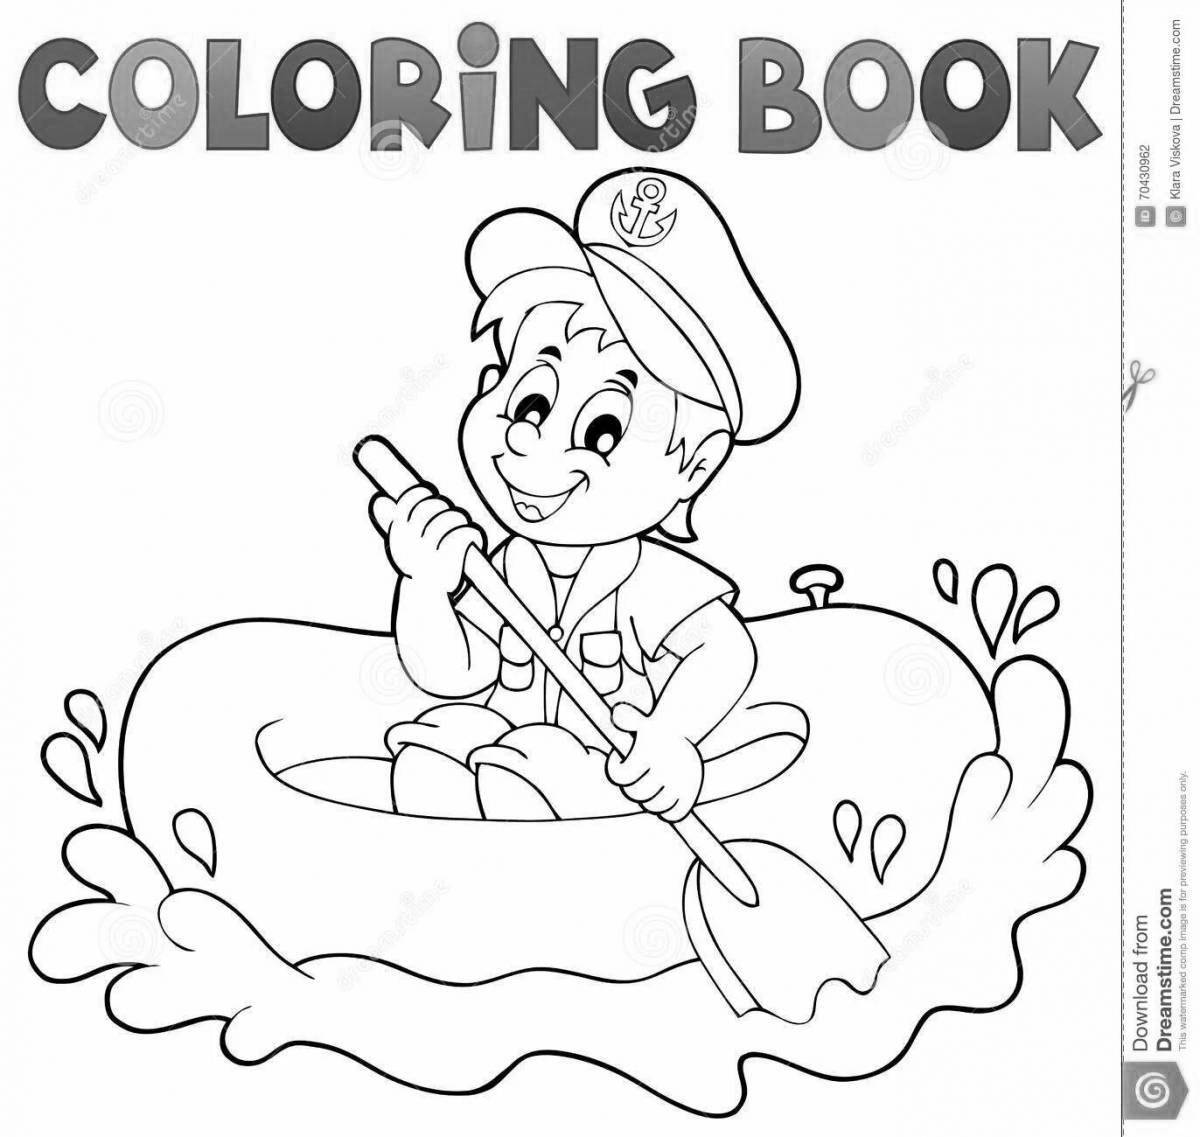 Coloring book funny hut for kids